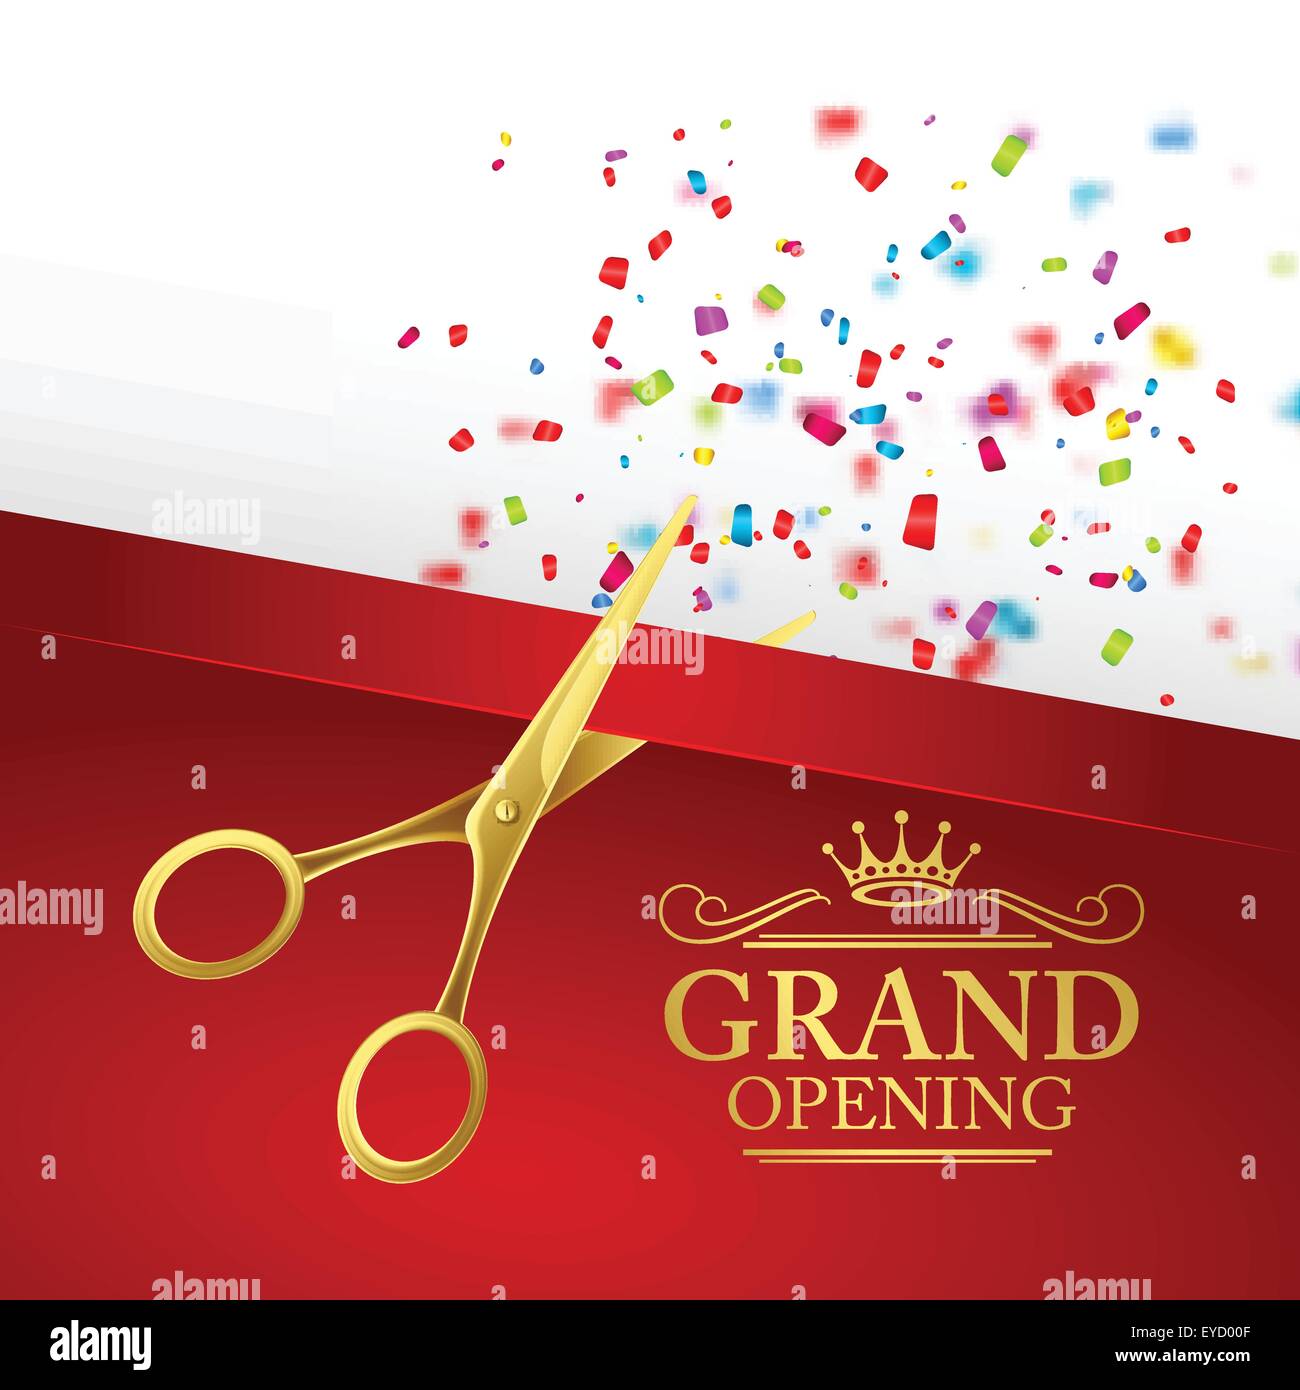 Grand Opening Illustration With Red Ribbon And Gold Scissors Stock